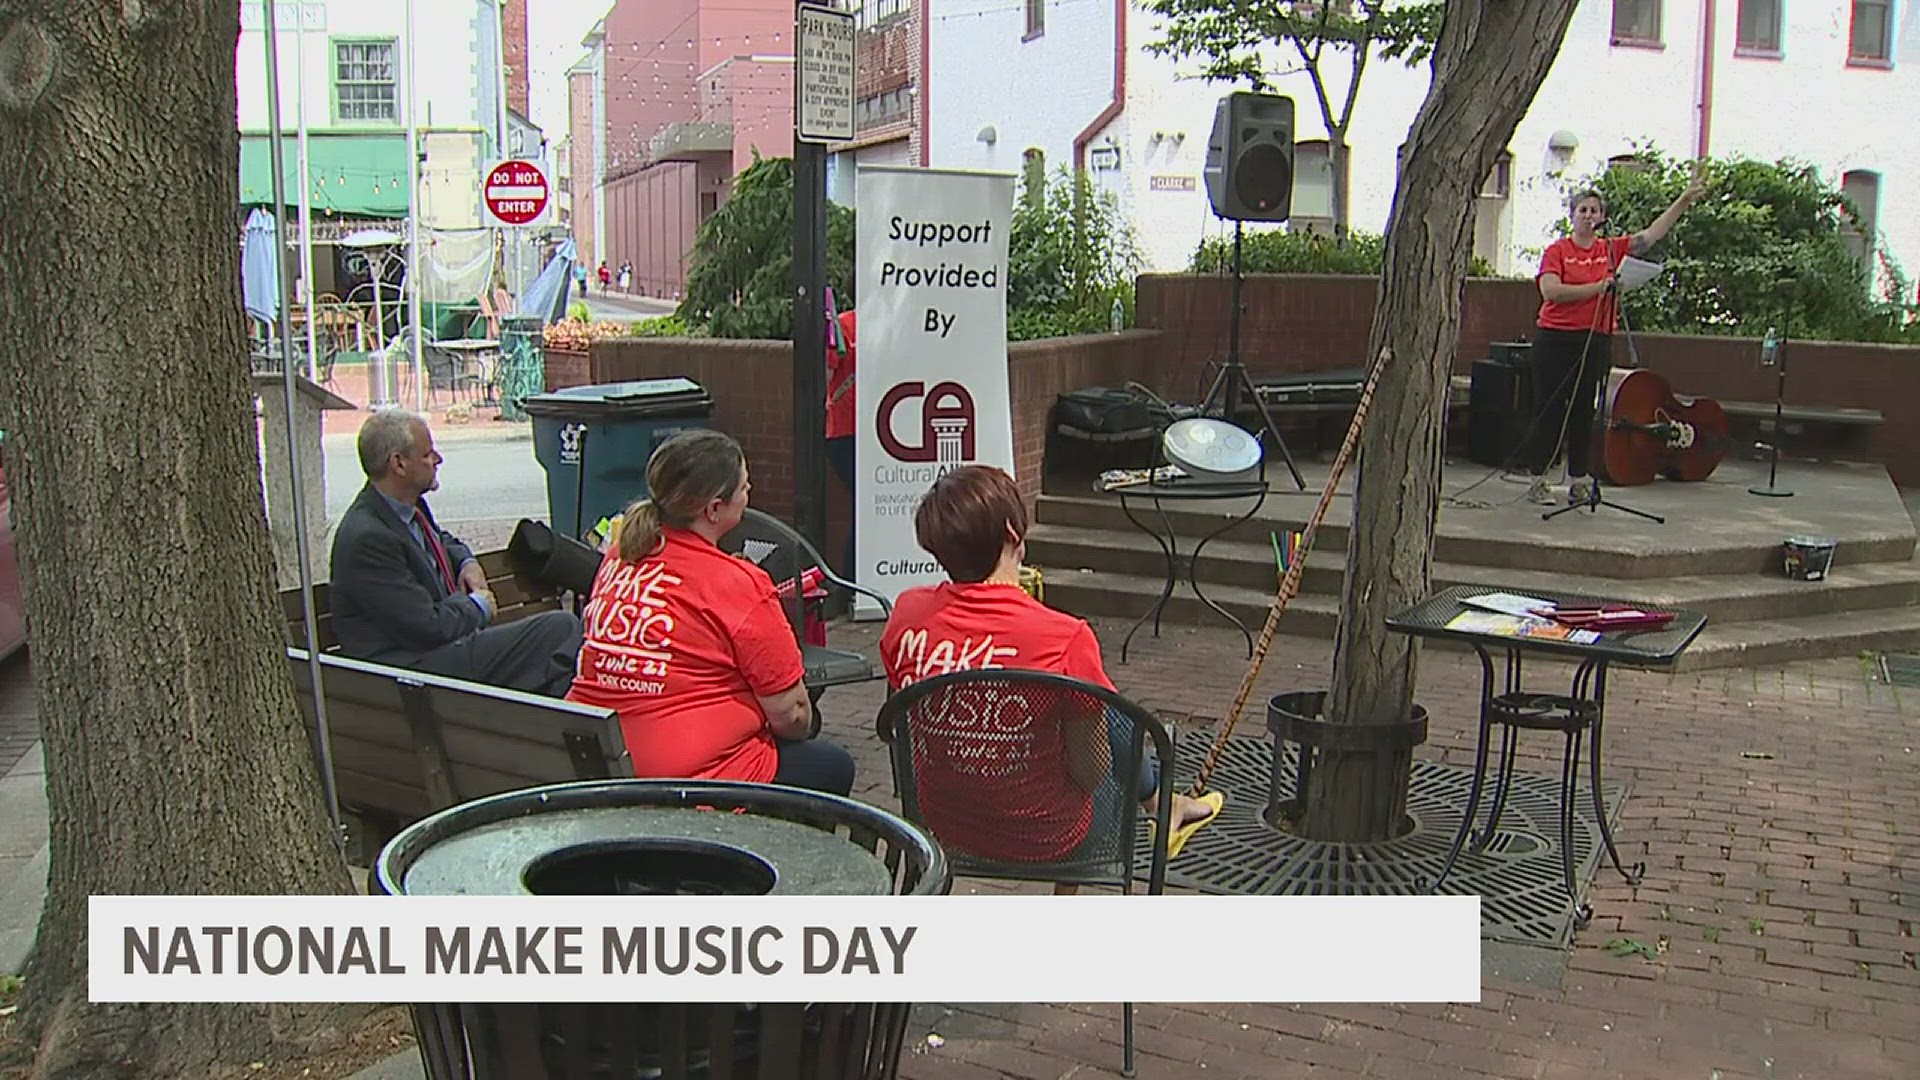 Make Music Day is an international celebration that encourages people to dive into the arts and try something new with different forms of music.